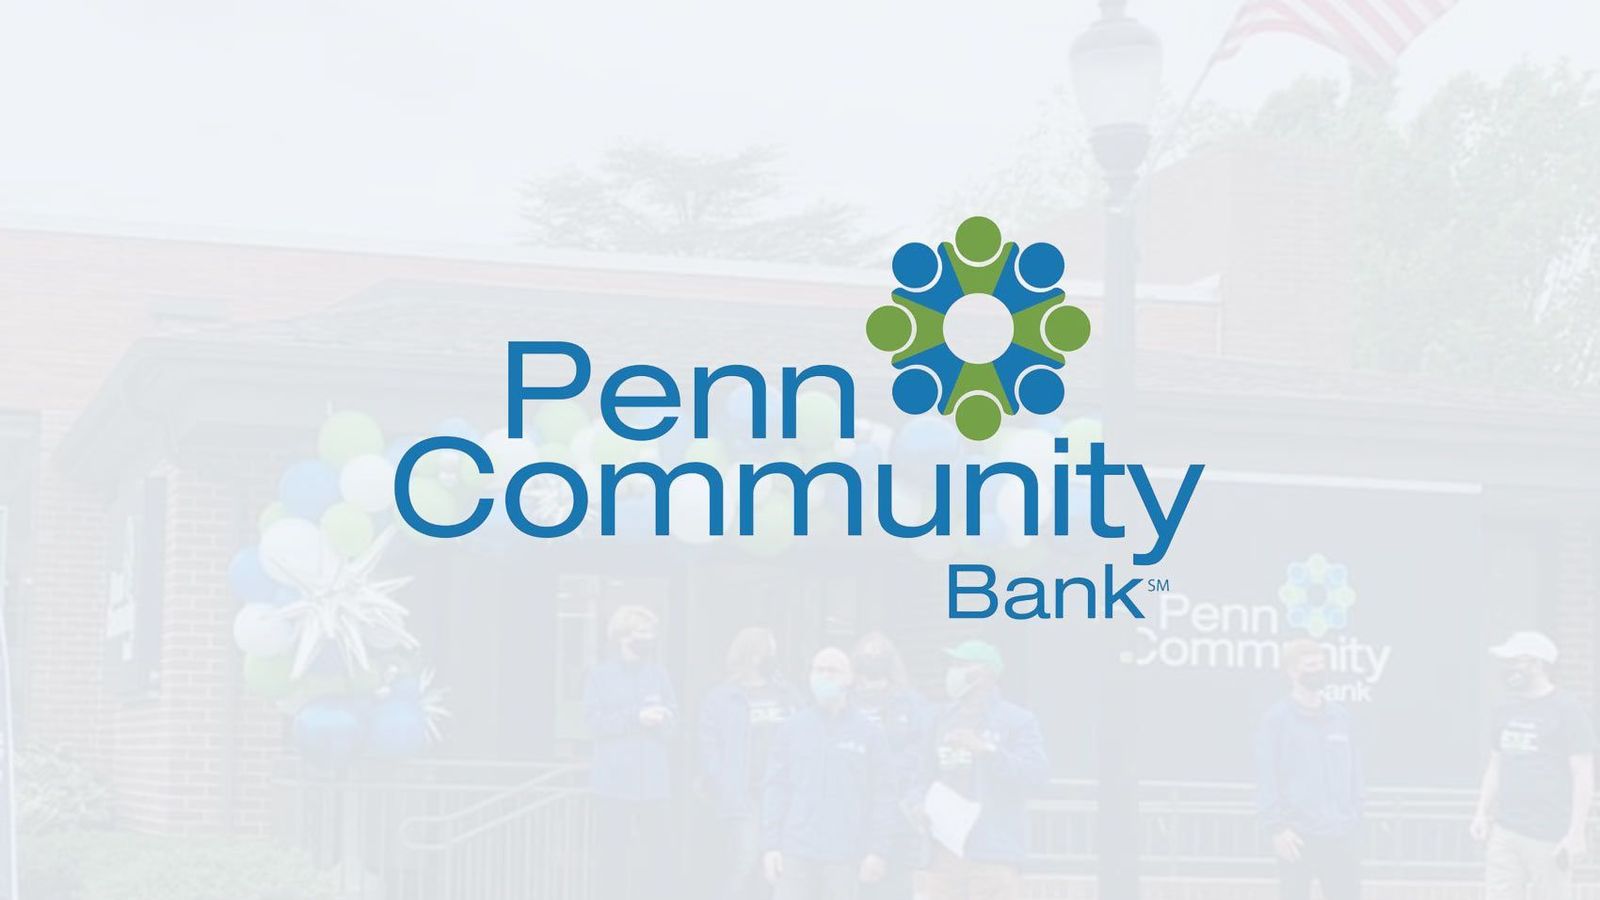 How Penn Community Bank Enabled Bankers to Leverage Learning During a Crisis